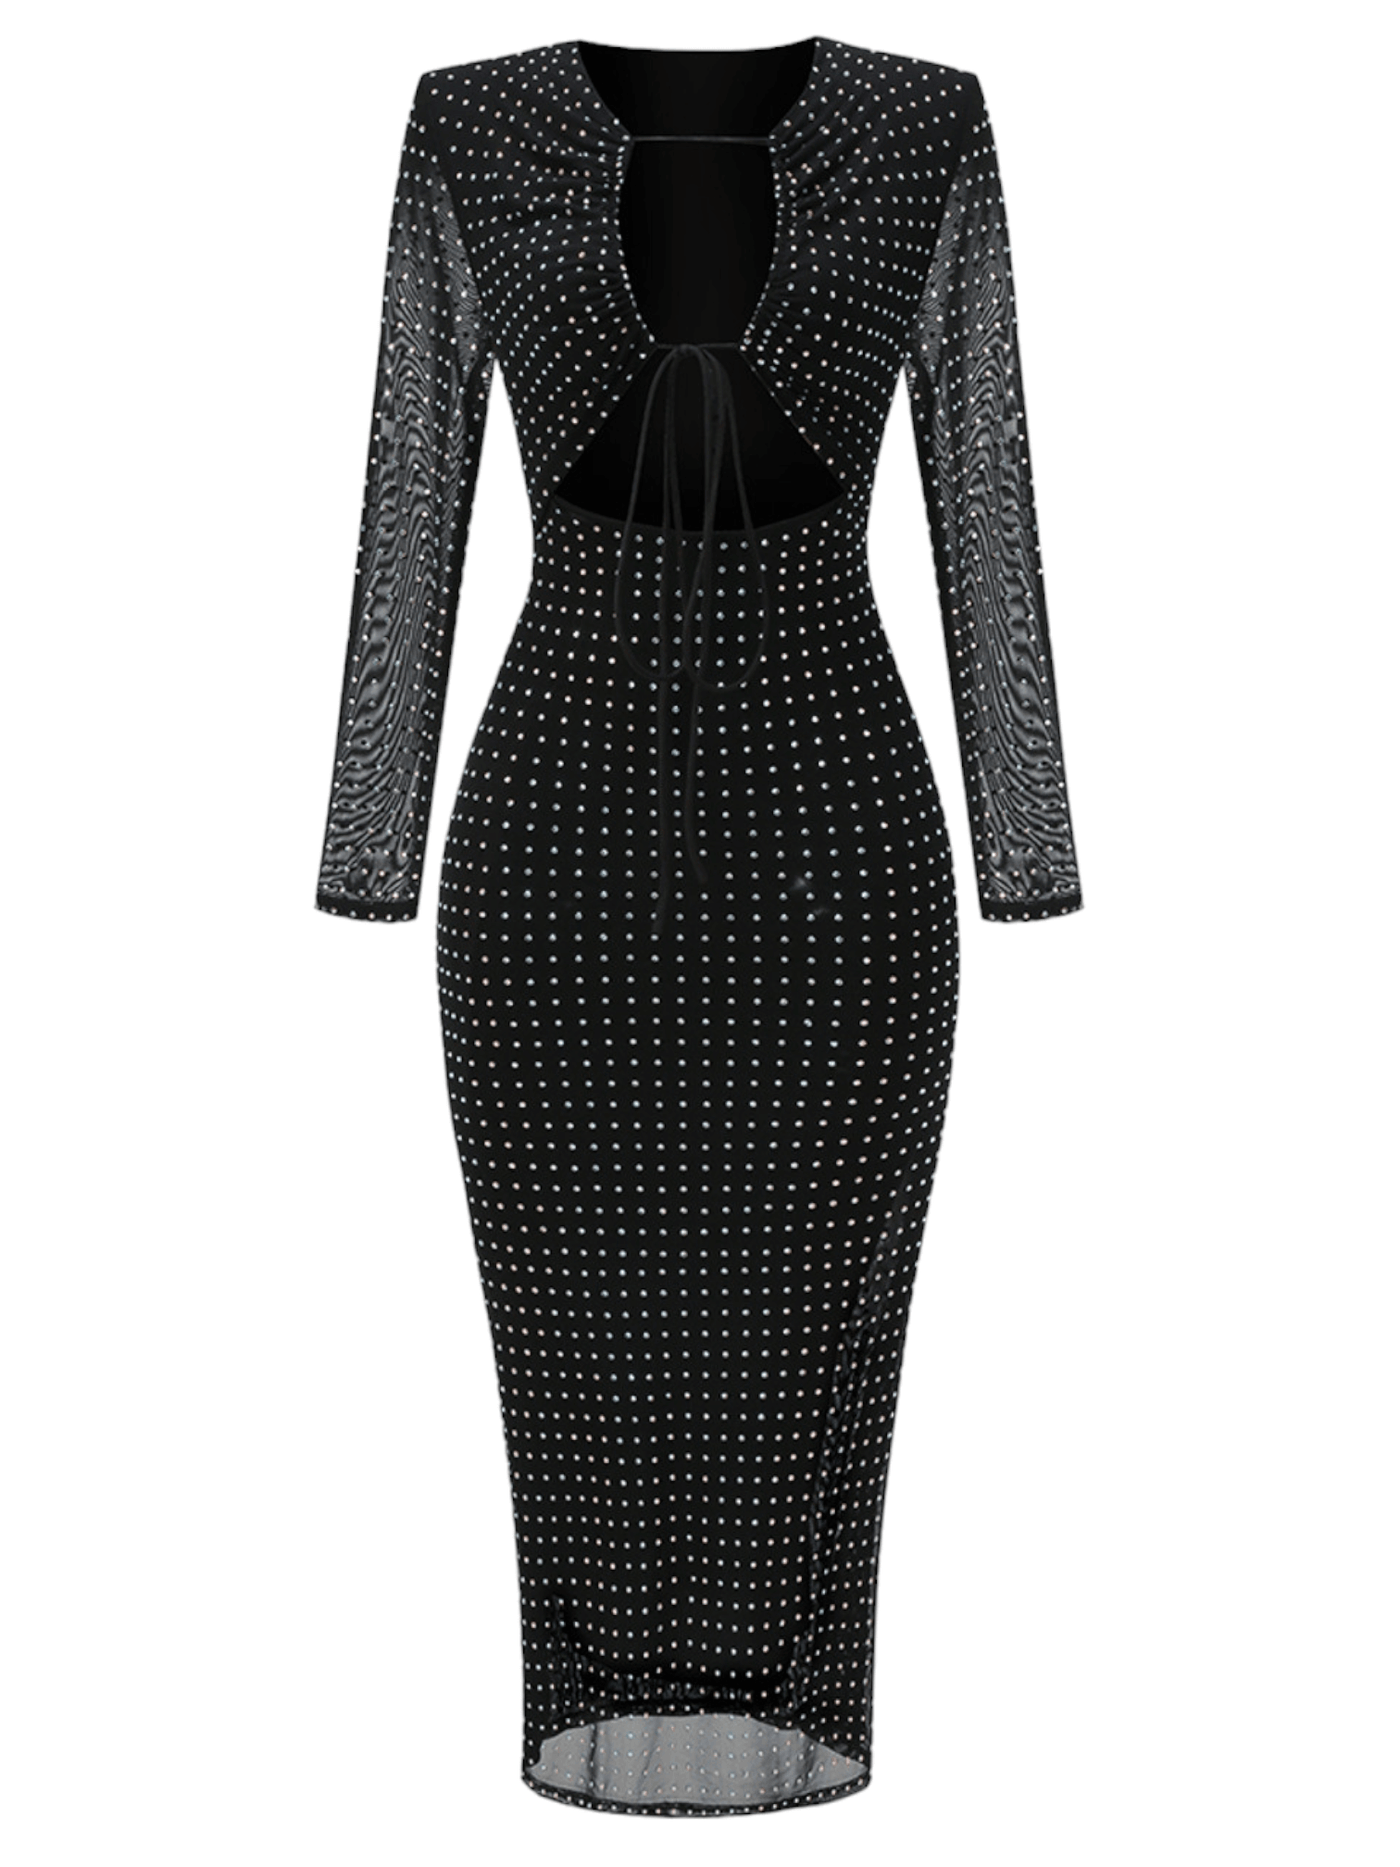 Black long sleeve midi dress with crystal cut-outs – elegant and captivating for any sophisticated event